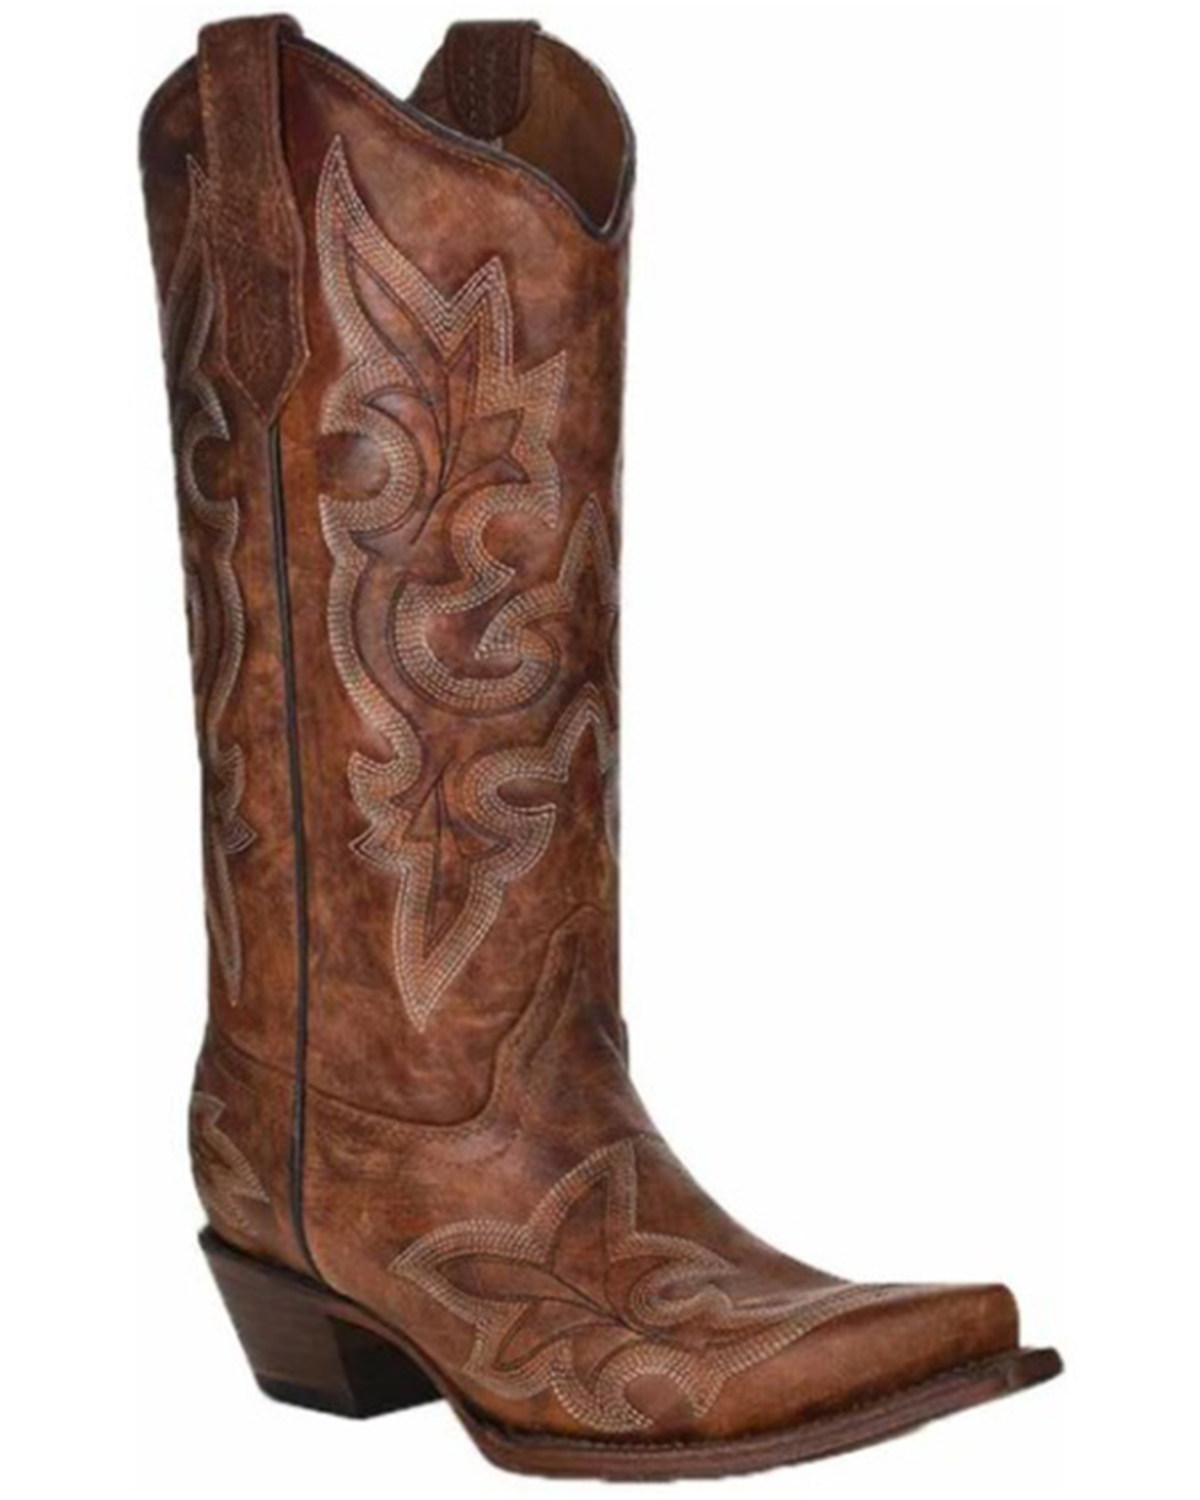 Circle G Women's Tan Embroidery Western Boots - Snip Toe